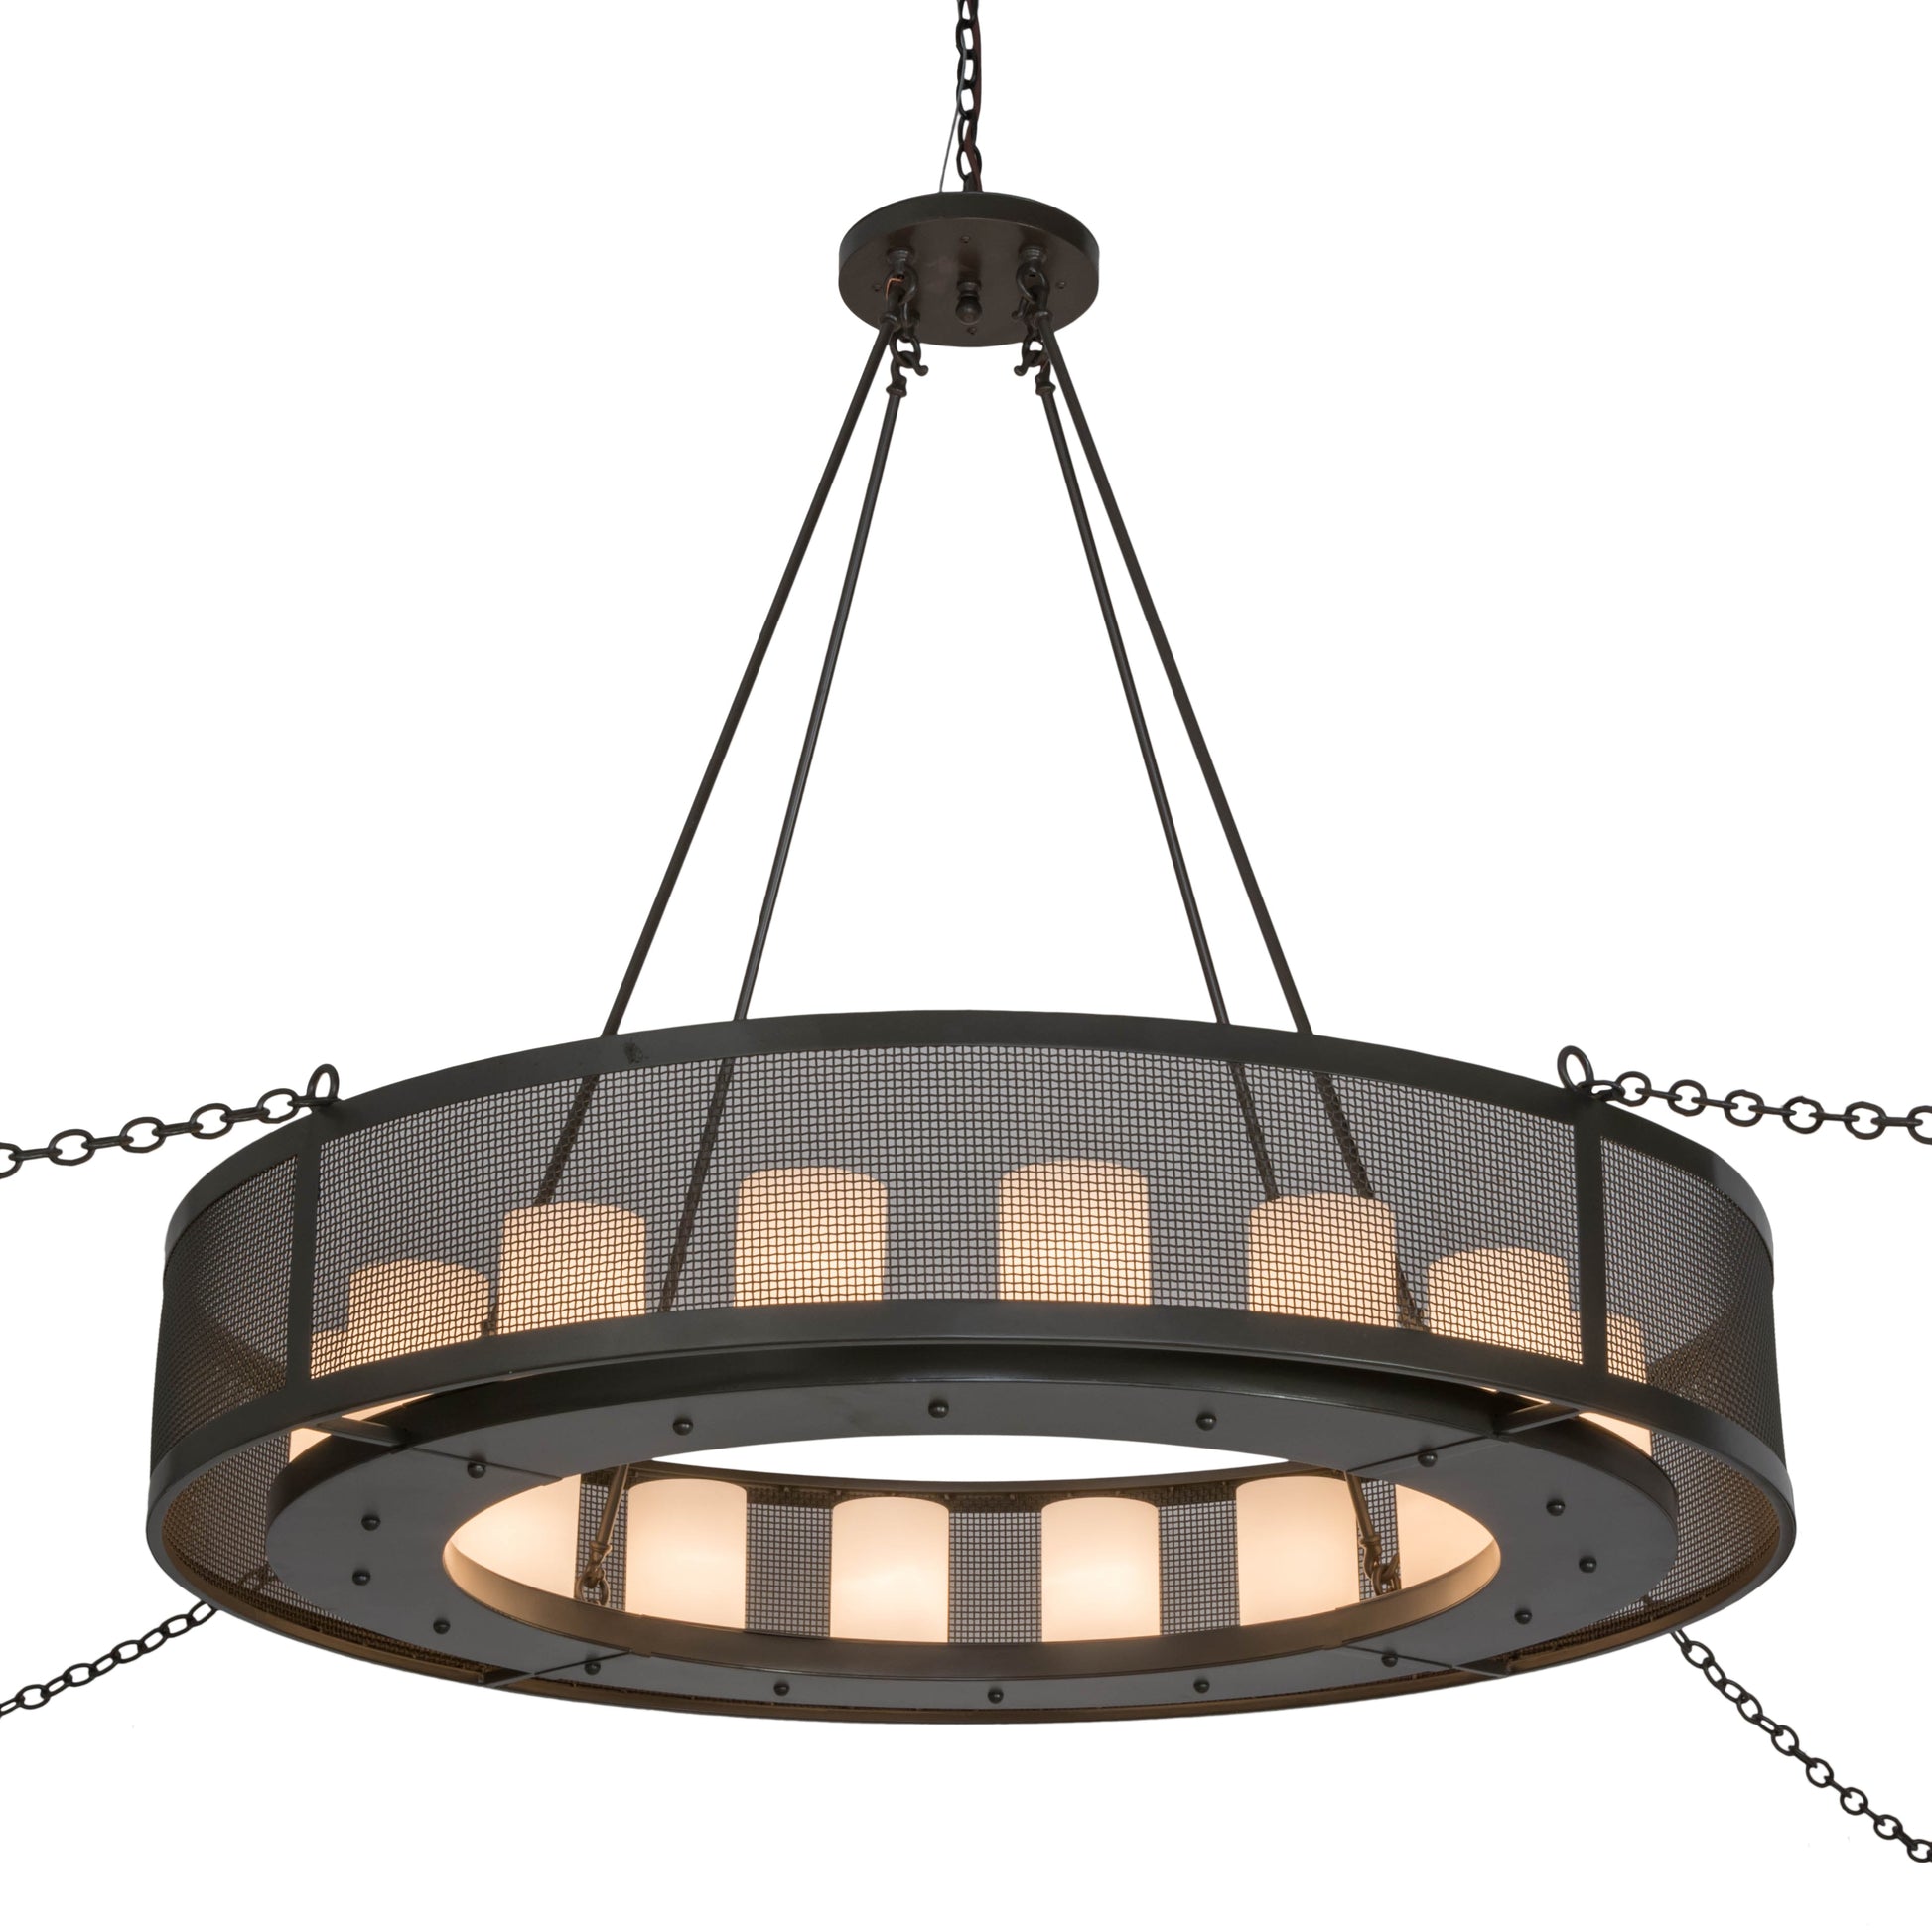 56" Loxley Golpe 16-Light Chandelier by 2nd Ave Lighting